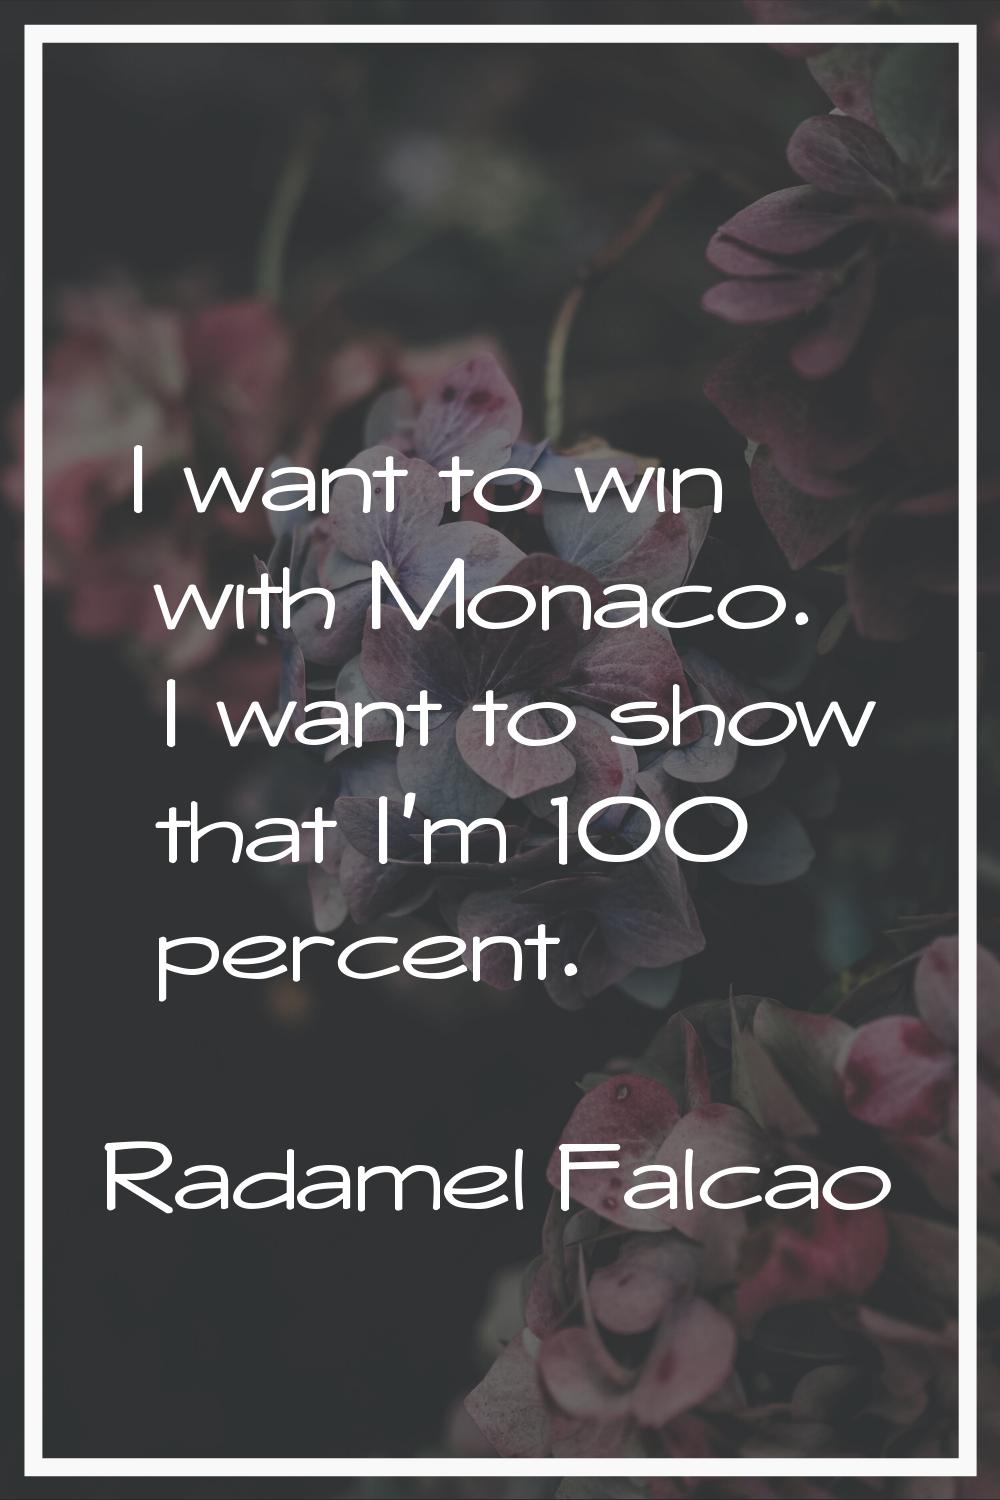 I want to win with Monaco. I want to show that I'm 100 percent.